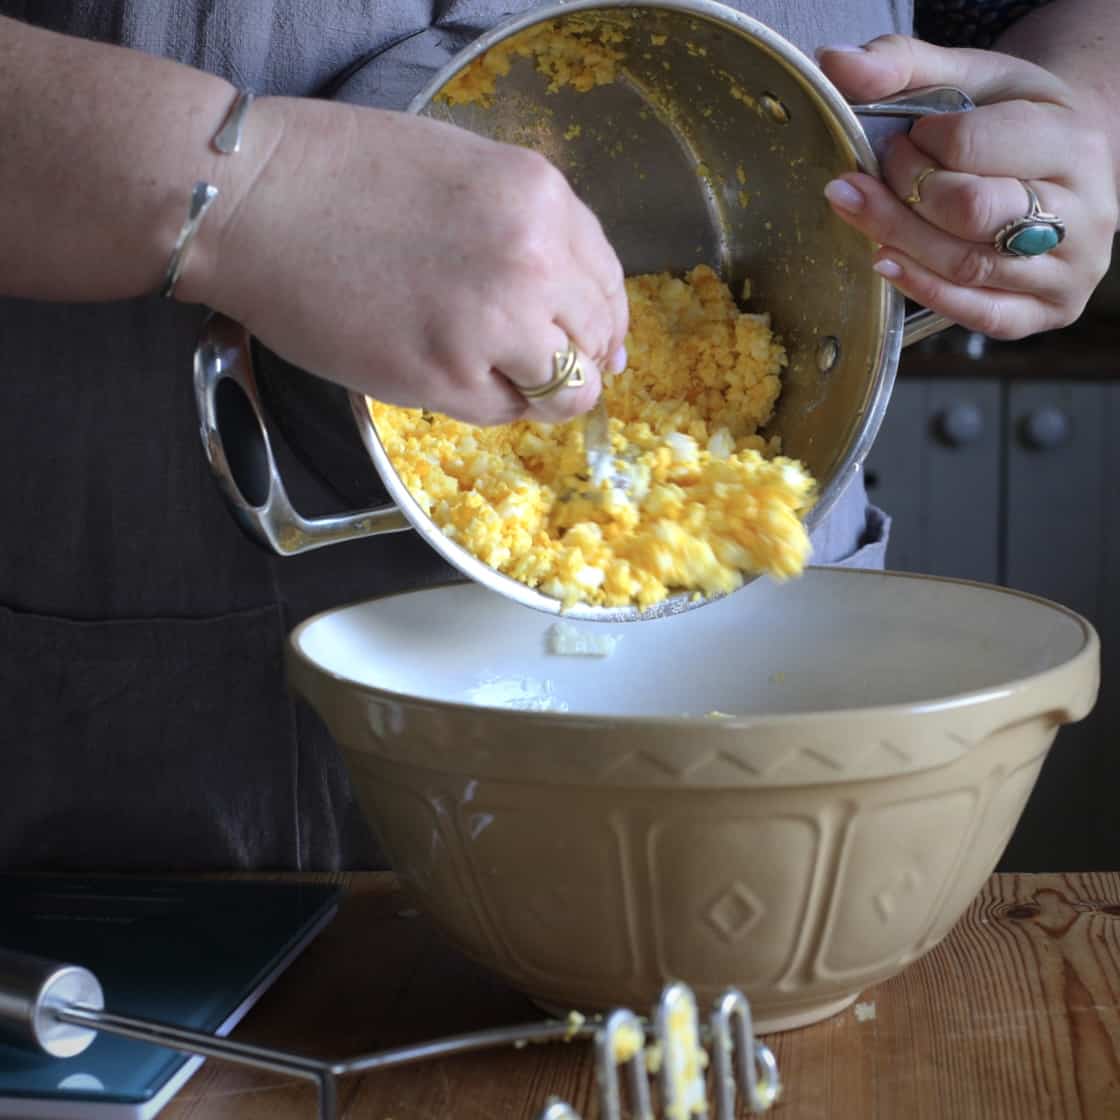 Womans scraping mashed hard boiled eggs from a silver saucepan into a brown mixing bowl